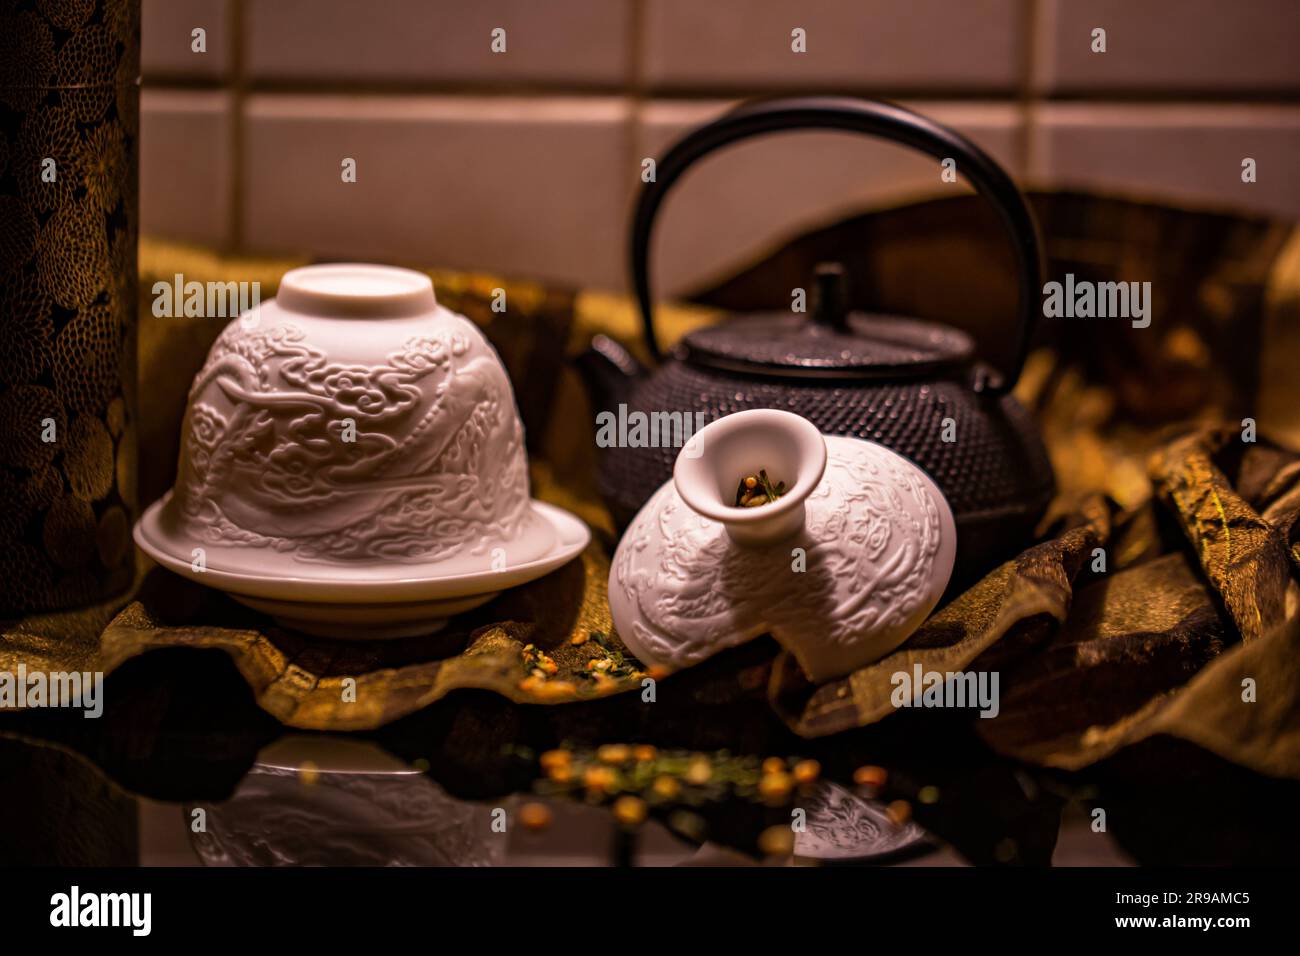 A vintage iron teapot is displayed alongside two ceramic mugs, creating a cozy and inviting atmosphere Stock Photo